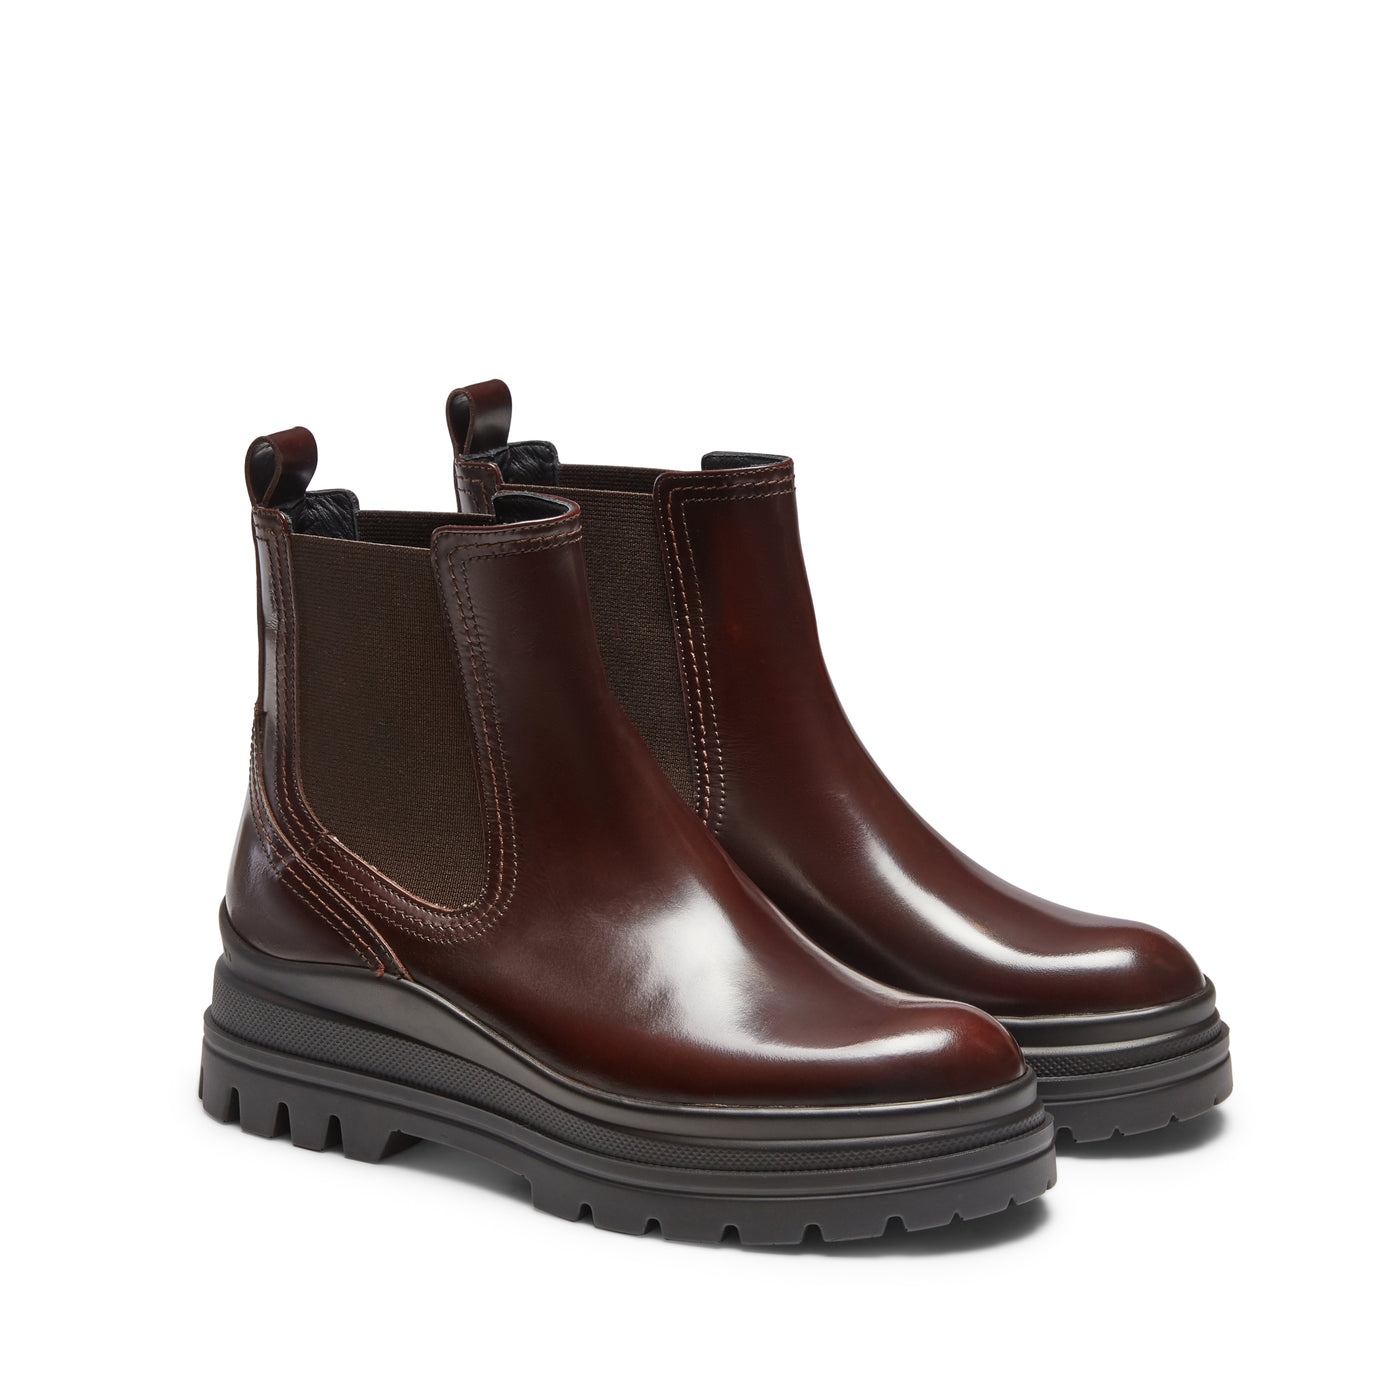 Shop The Latest Collection Of Fratelli Rossetti Fr W Ankle Boots-76179 In Lebanon